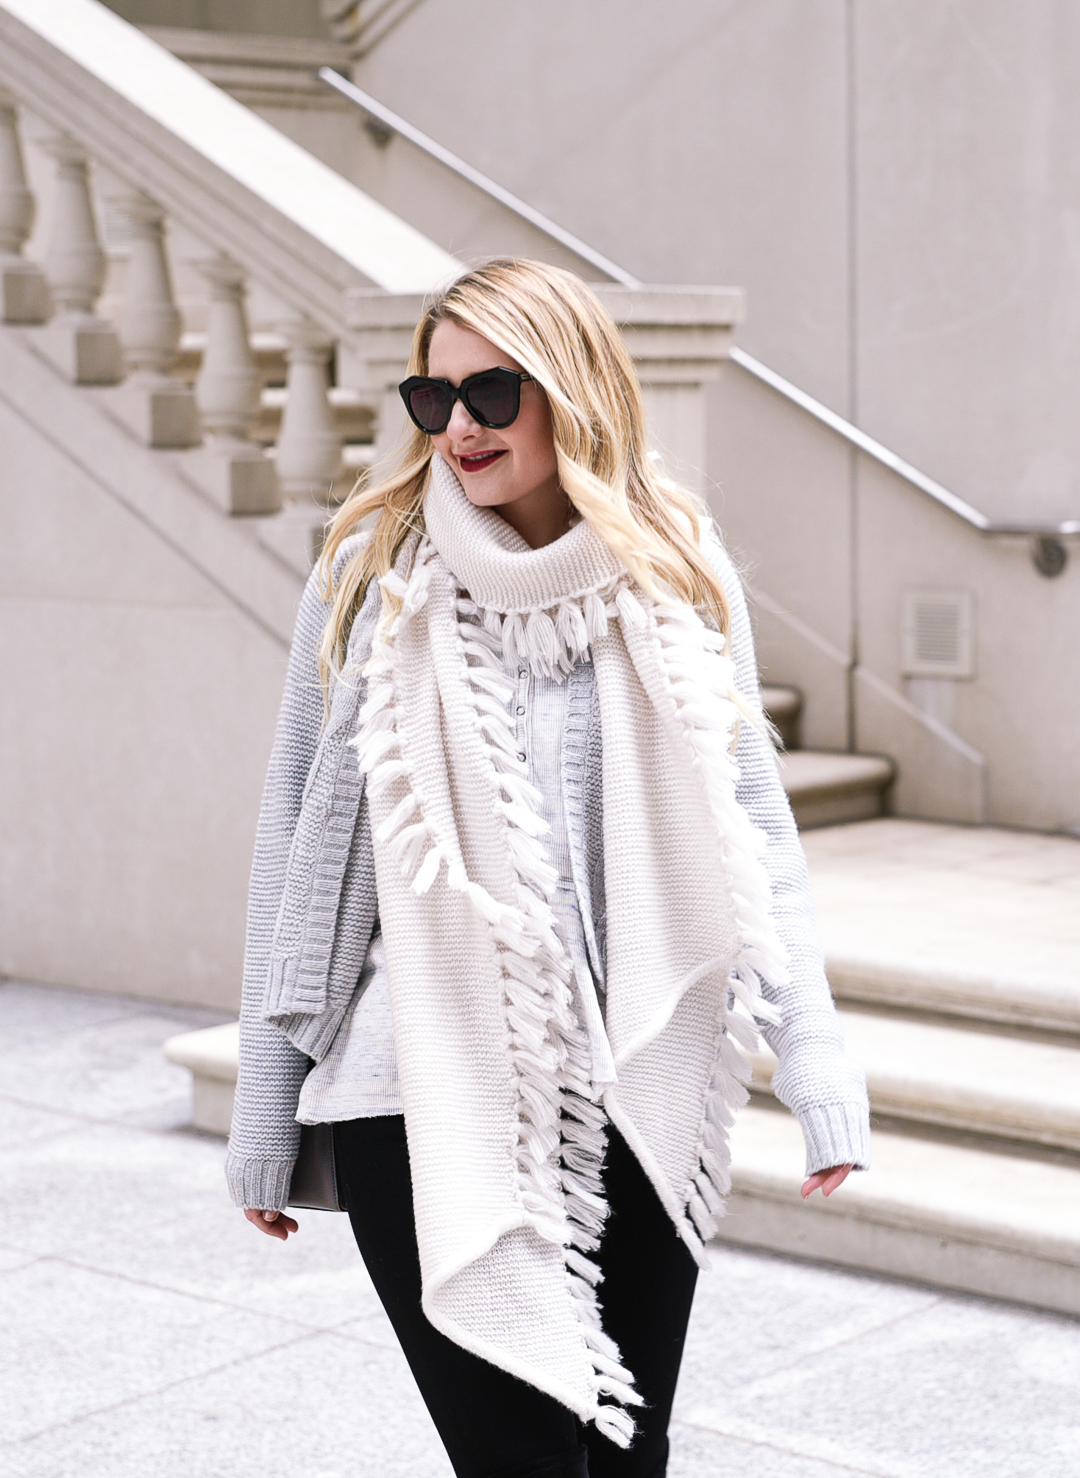 Cozy winter style with a grey cardigan, white scarf, and grey thermal top.